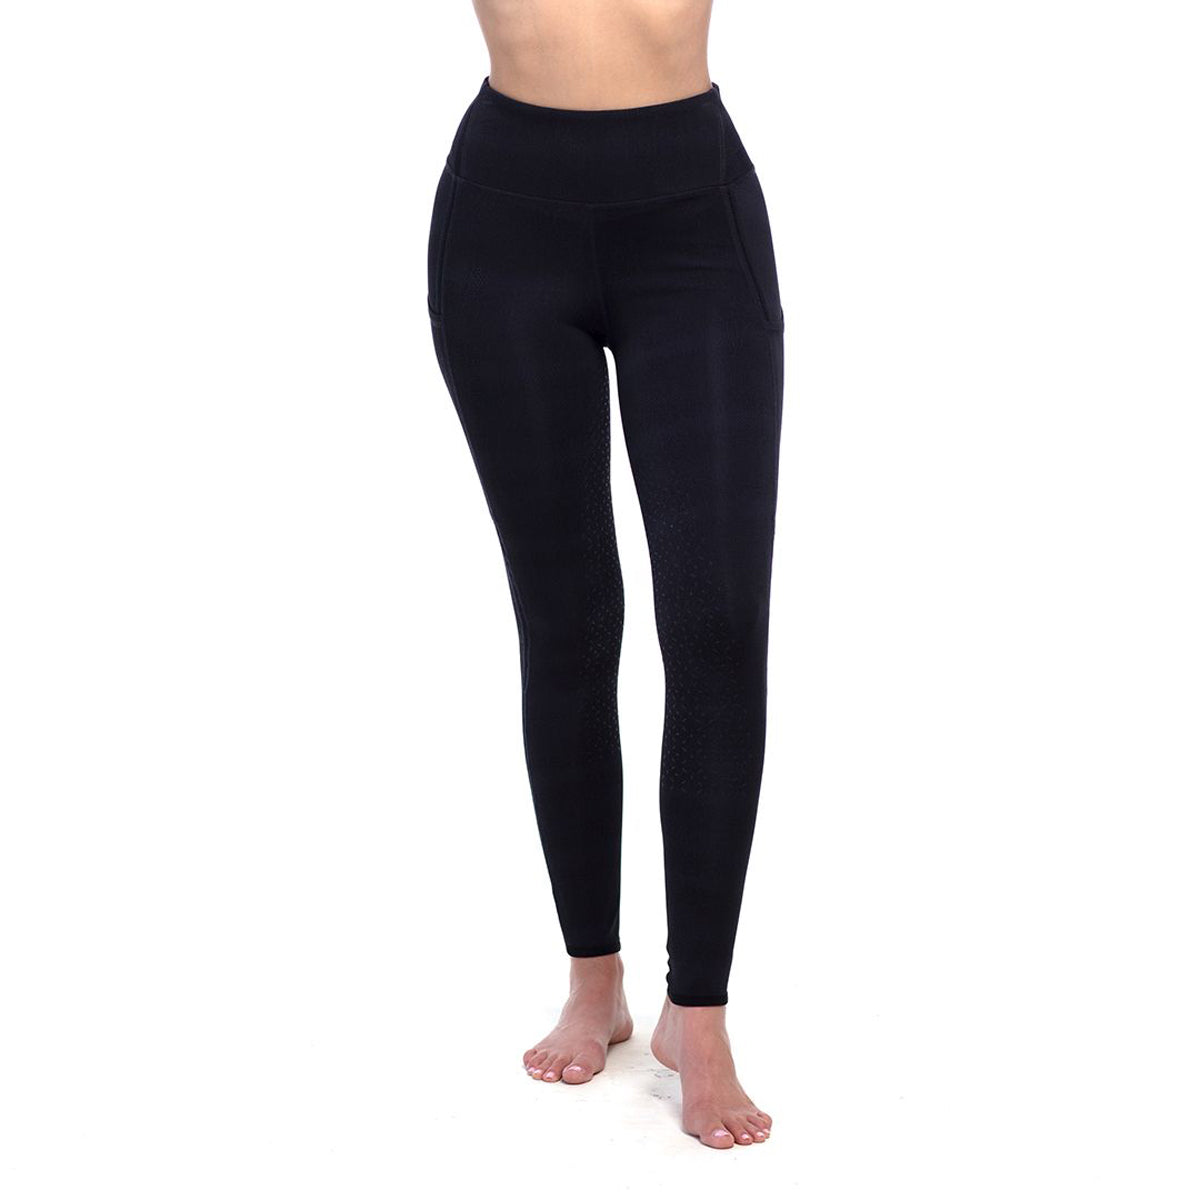 Goode Rider Perfect Sports Tights